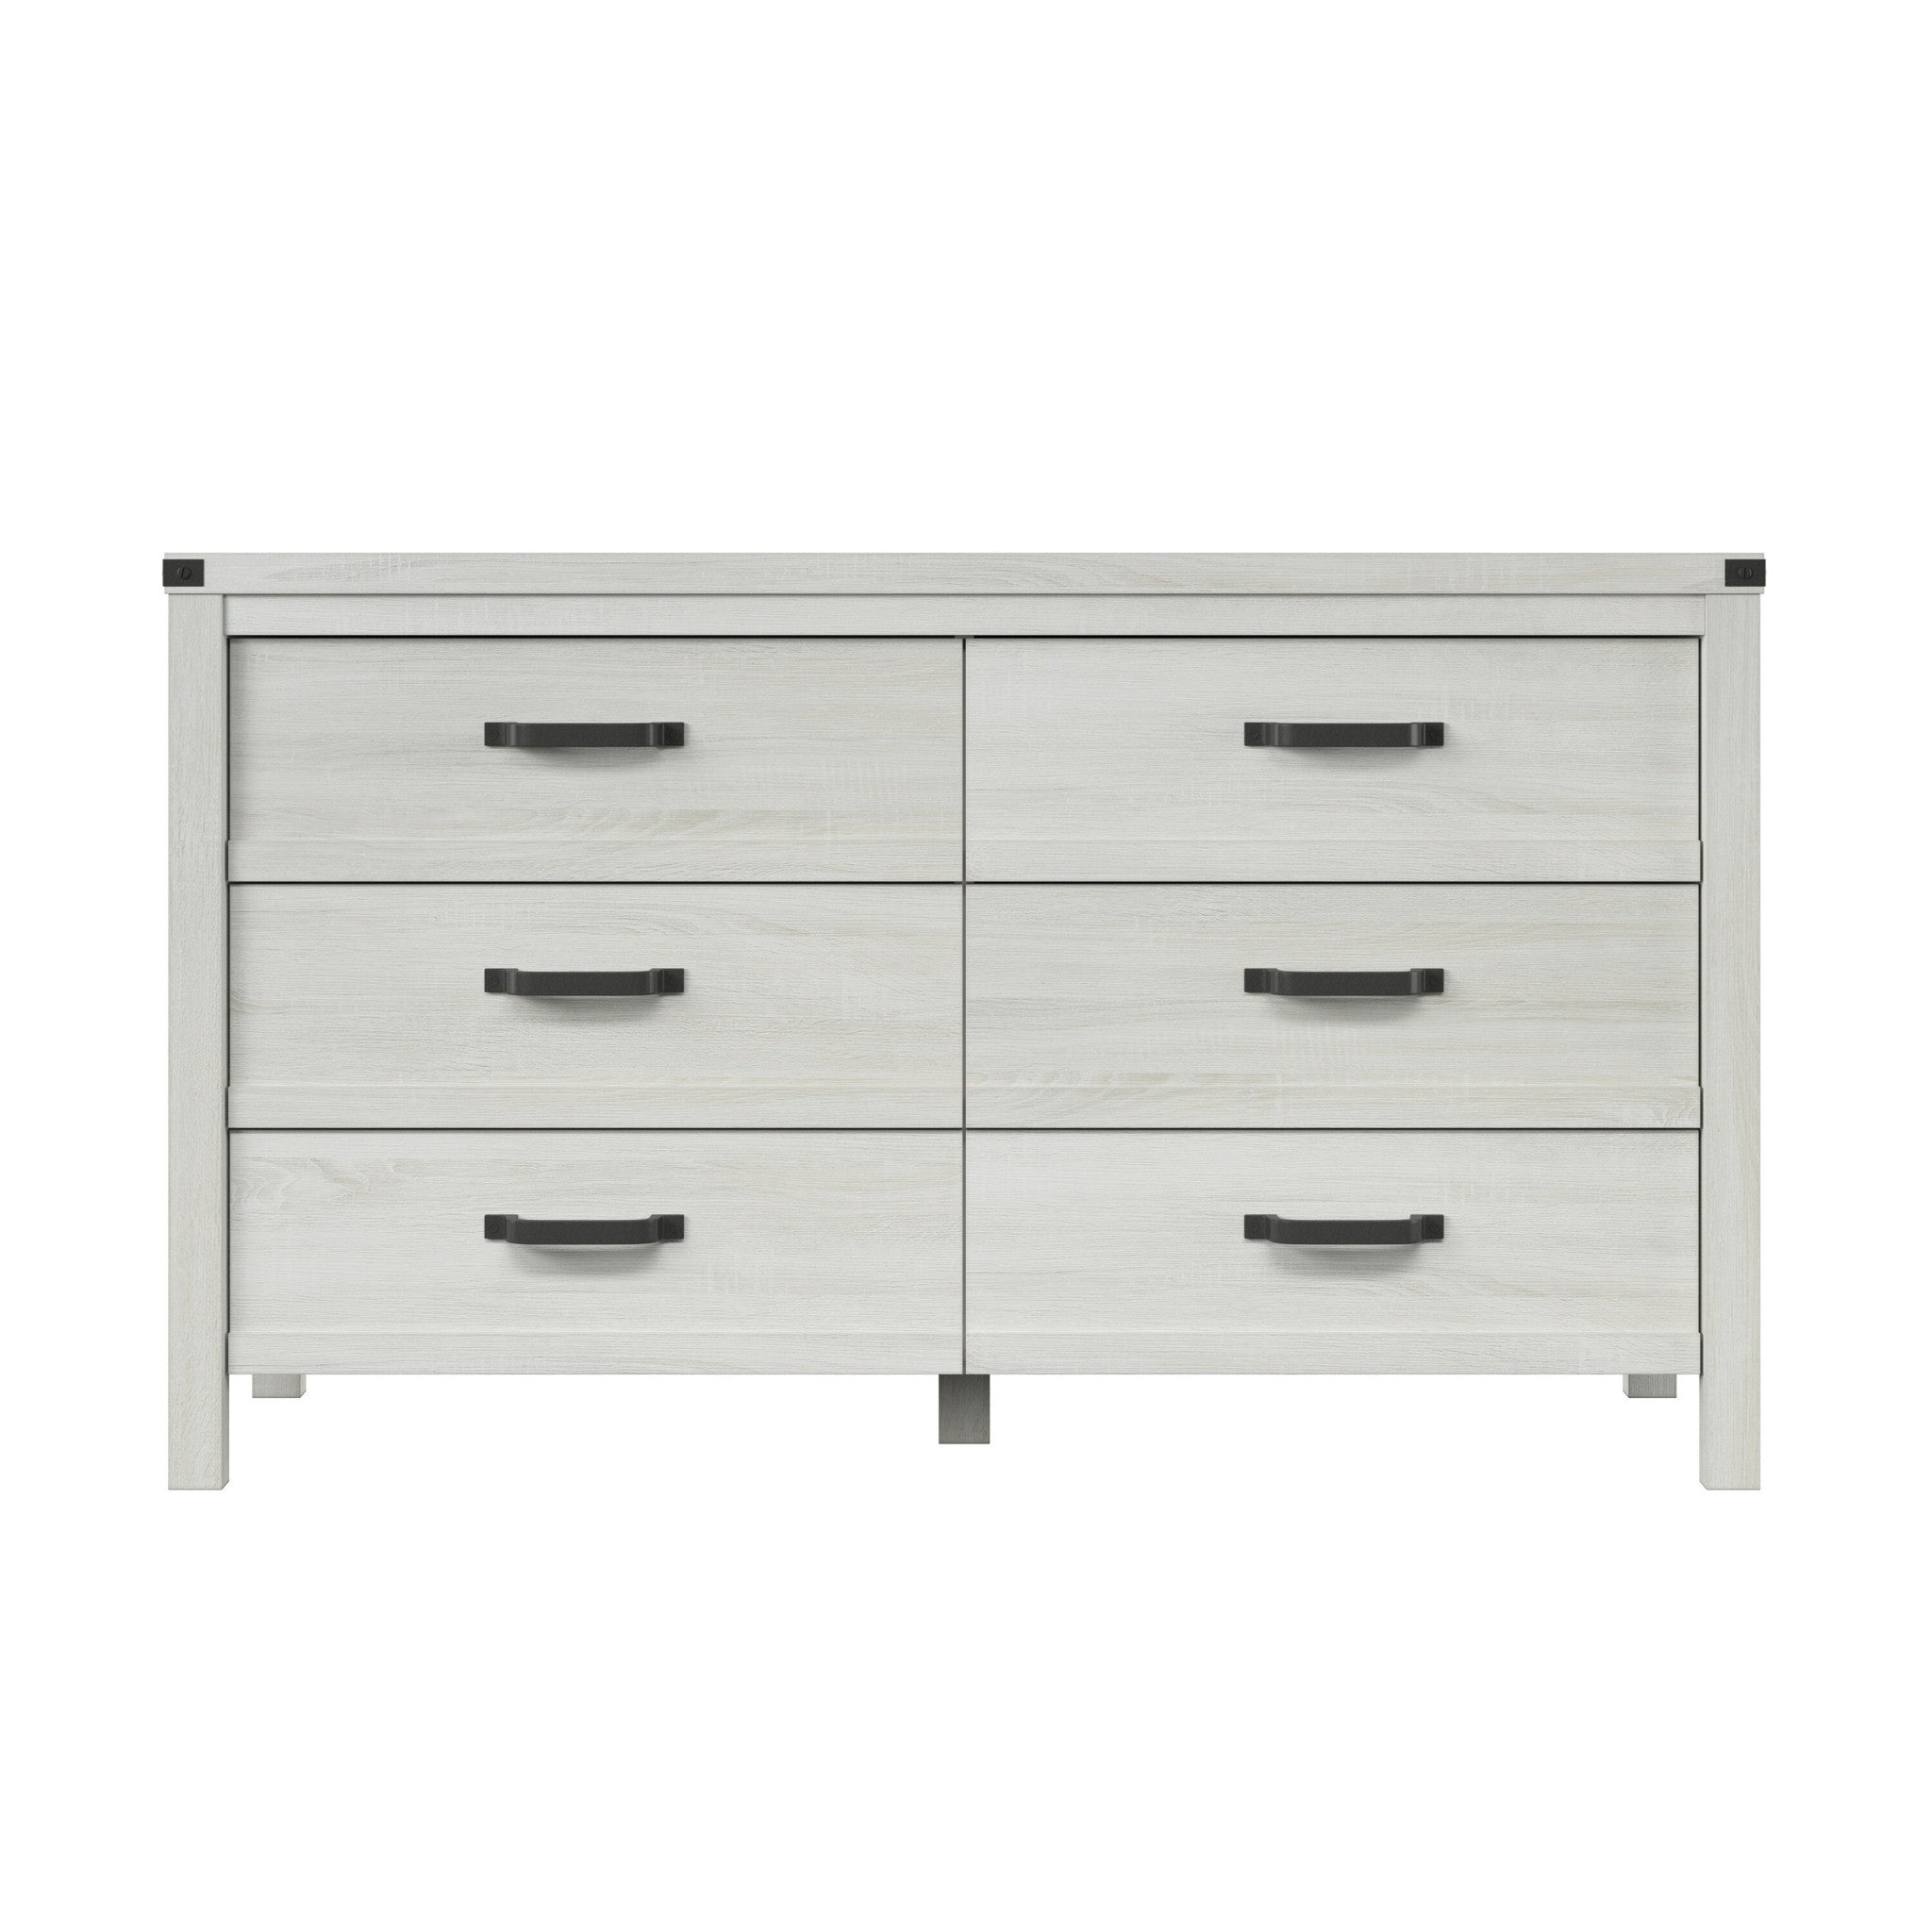 58" White Solid Wood Six Drawer Double Dresser